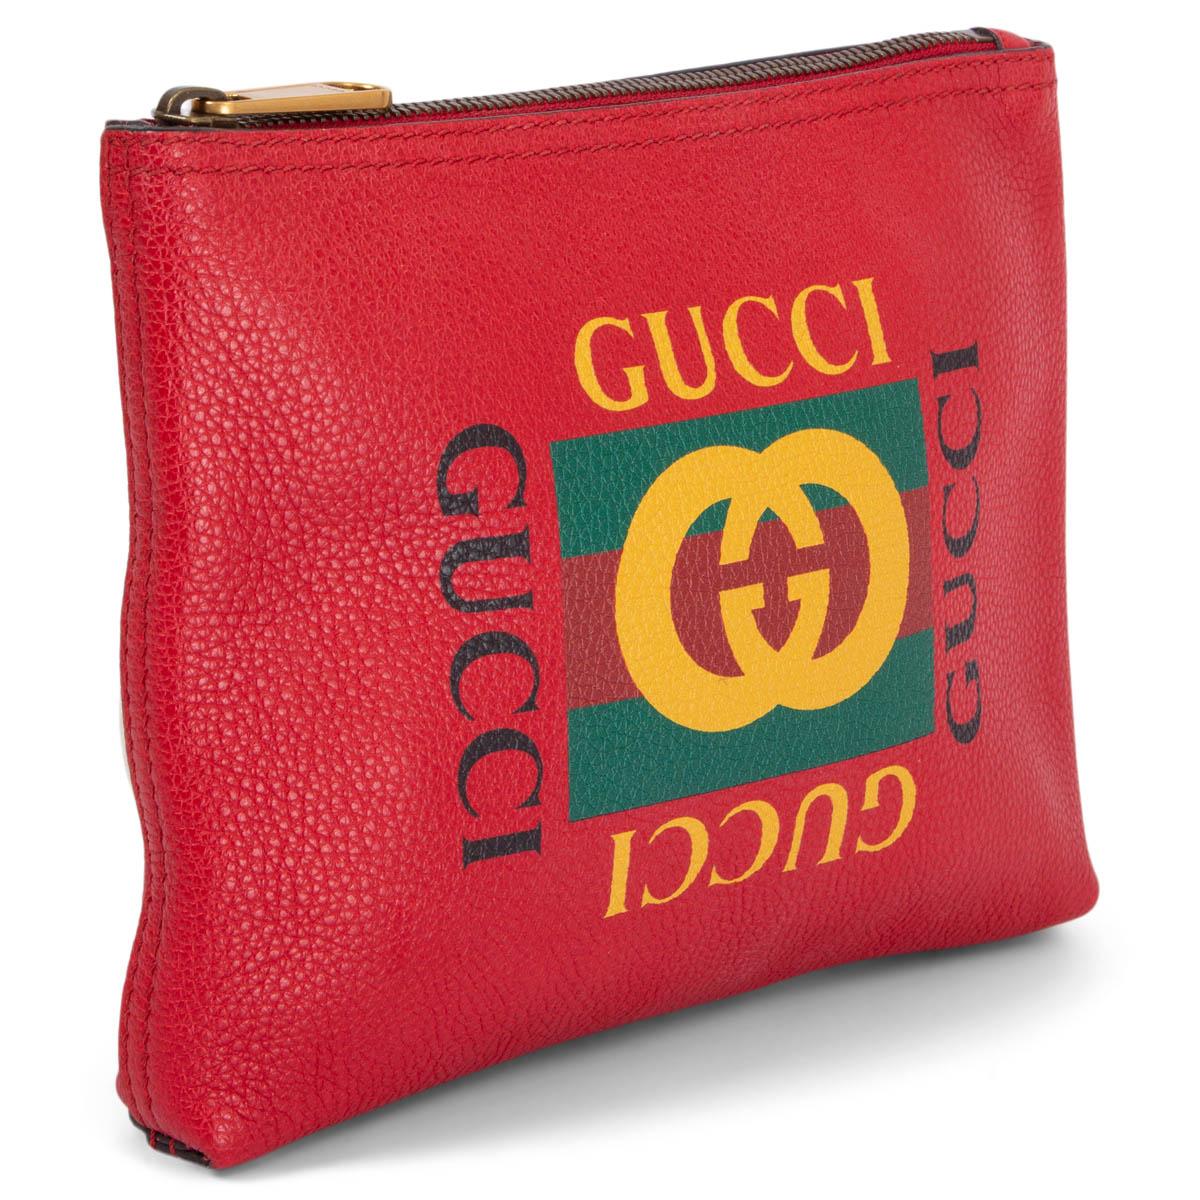 100% authentic Gucci pouch in red grained leather with classic green and yellow printed web stripes and logo. Opens with a zipper on top and is unlined. Has been carried once and is in virtually new condition. Comes with dust bag.